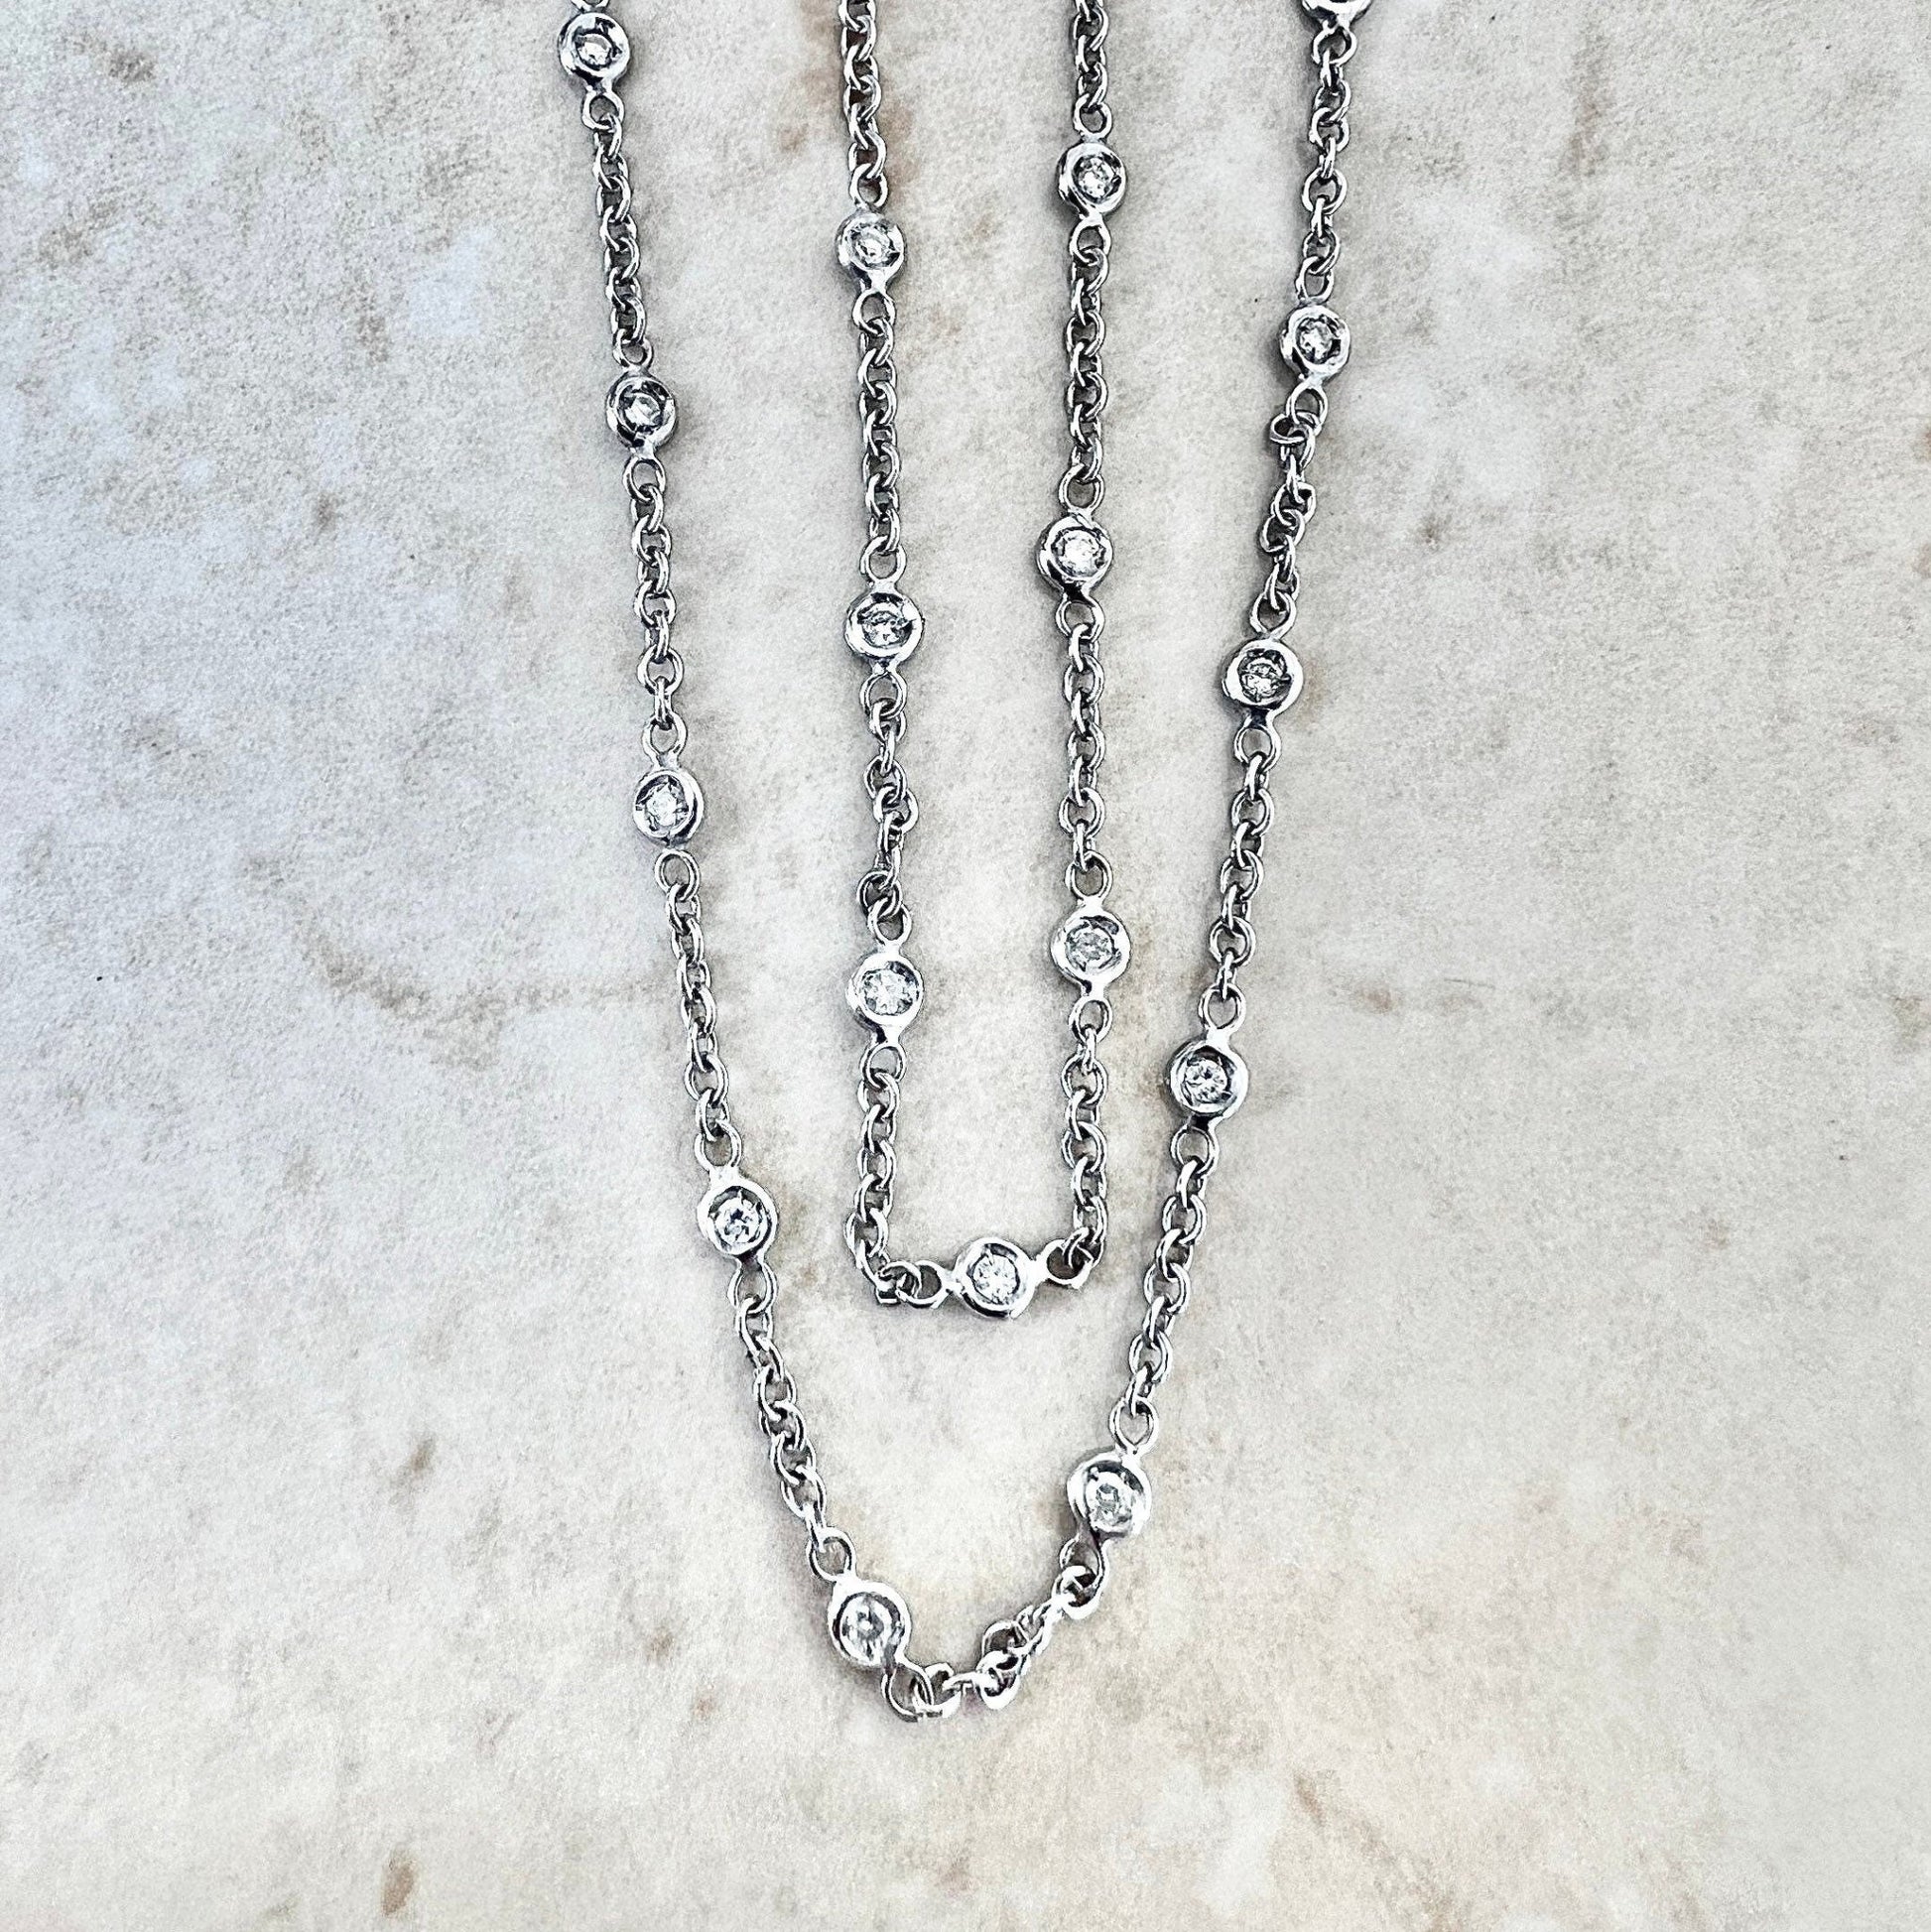 18K Diamond By The Yard Necklace - White Gold Diamond Station Necklace - Diamond Choker -Anniversary Gift -Birthday Gift -Best Gift For Her